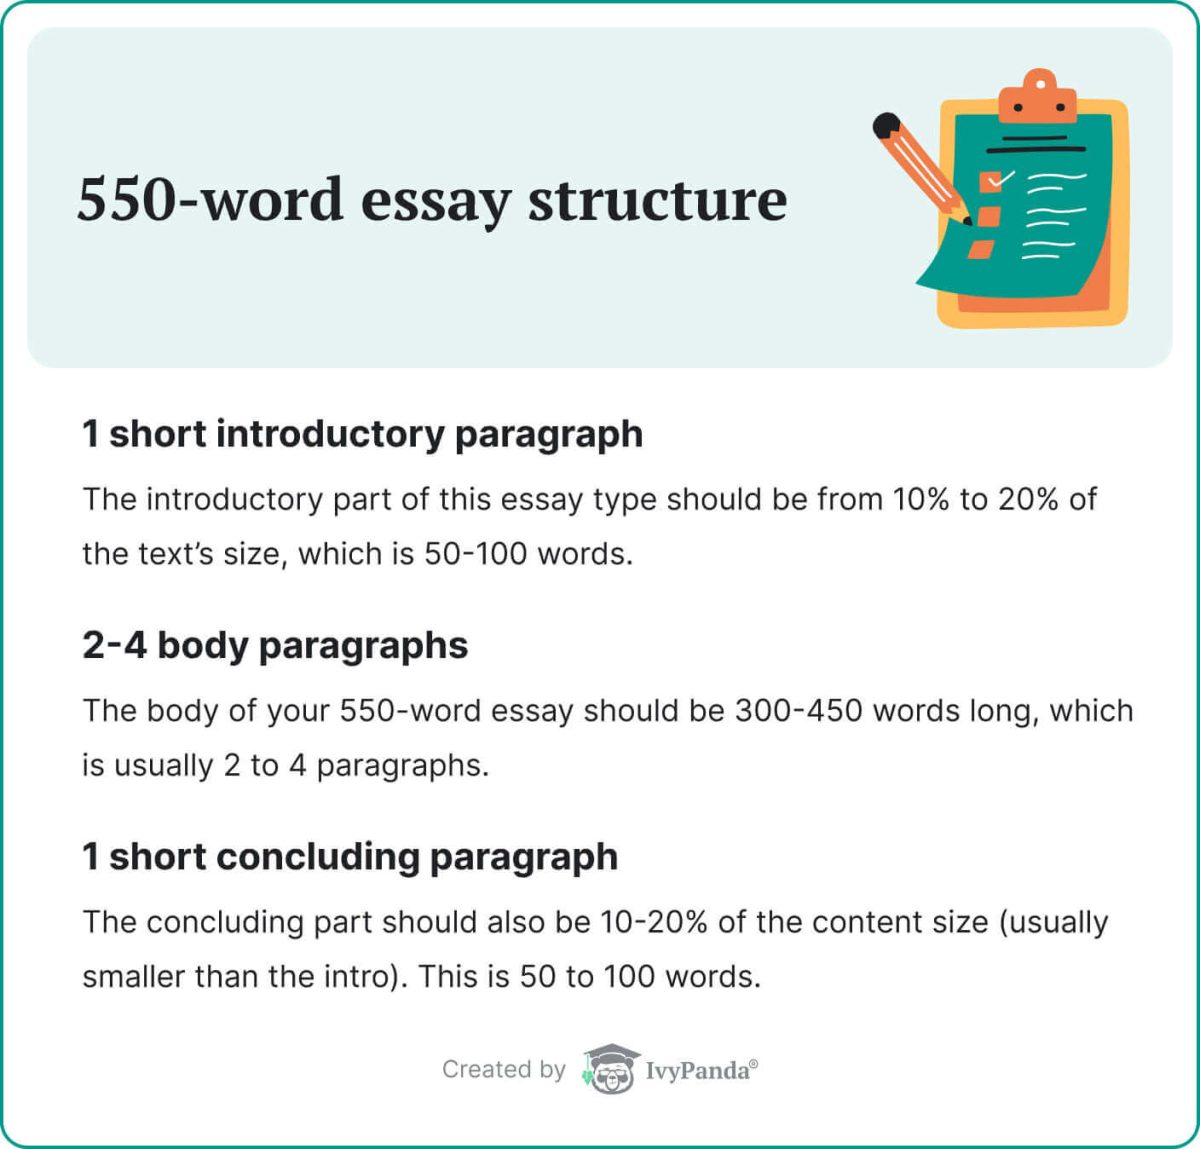 The picture lists the components of a 550-word essay.